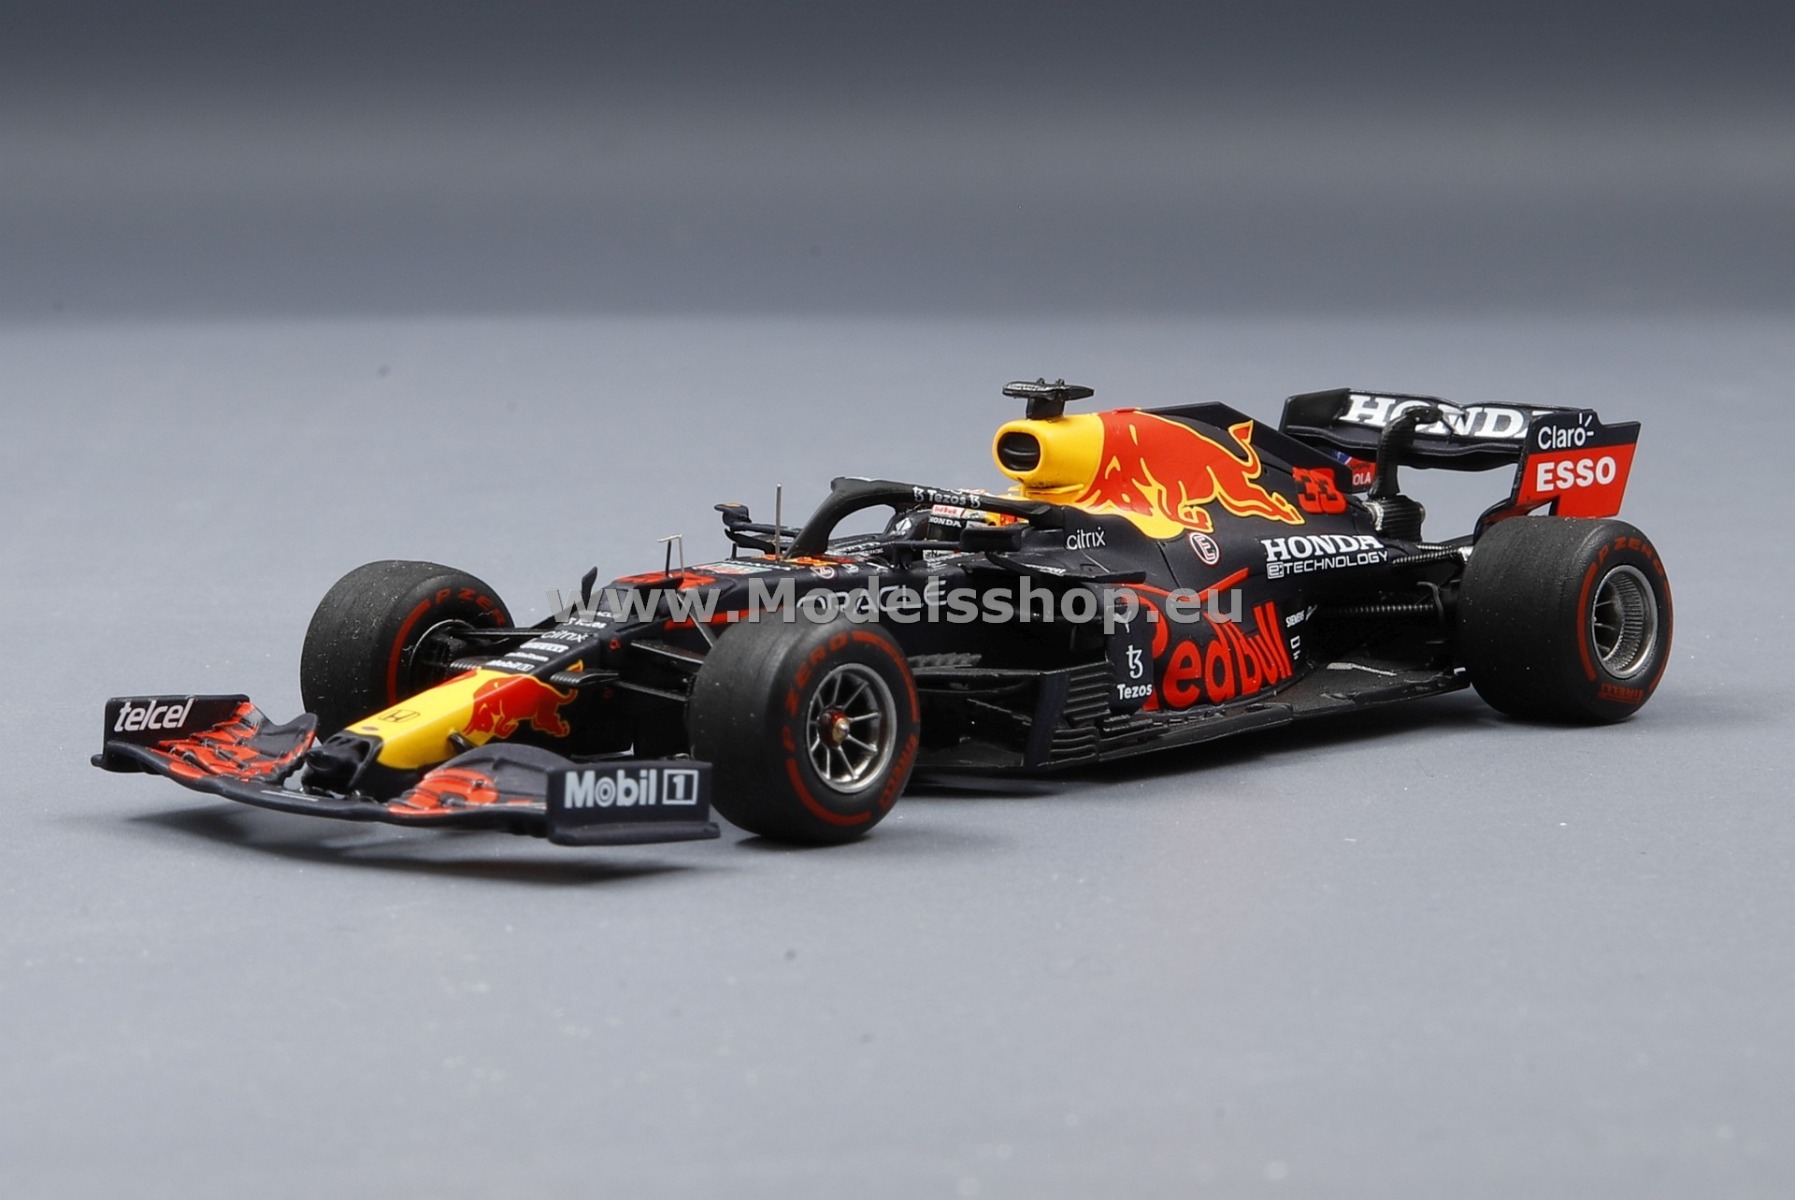 Spark S7861 Red Bull Racing Honda RB16B No.33 Red Bull Racing Winner Abu Dhabi GP 2021 World Champion Edition With No.1 Board and Pit Board Max Verstappen